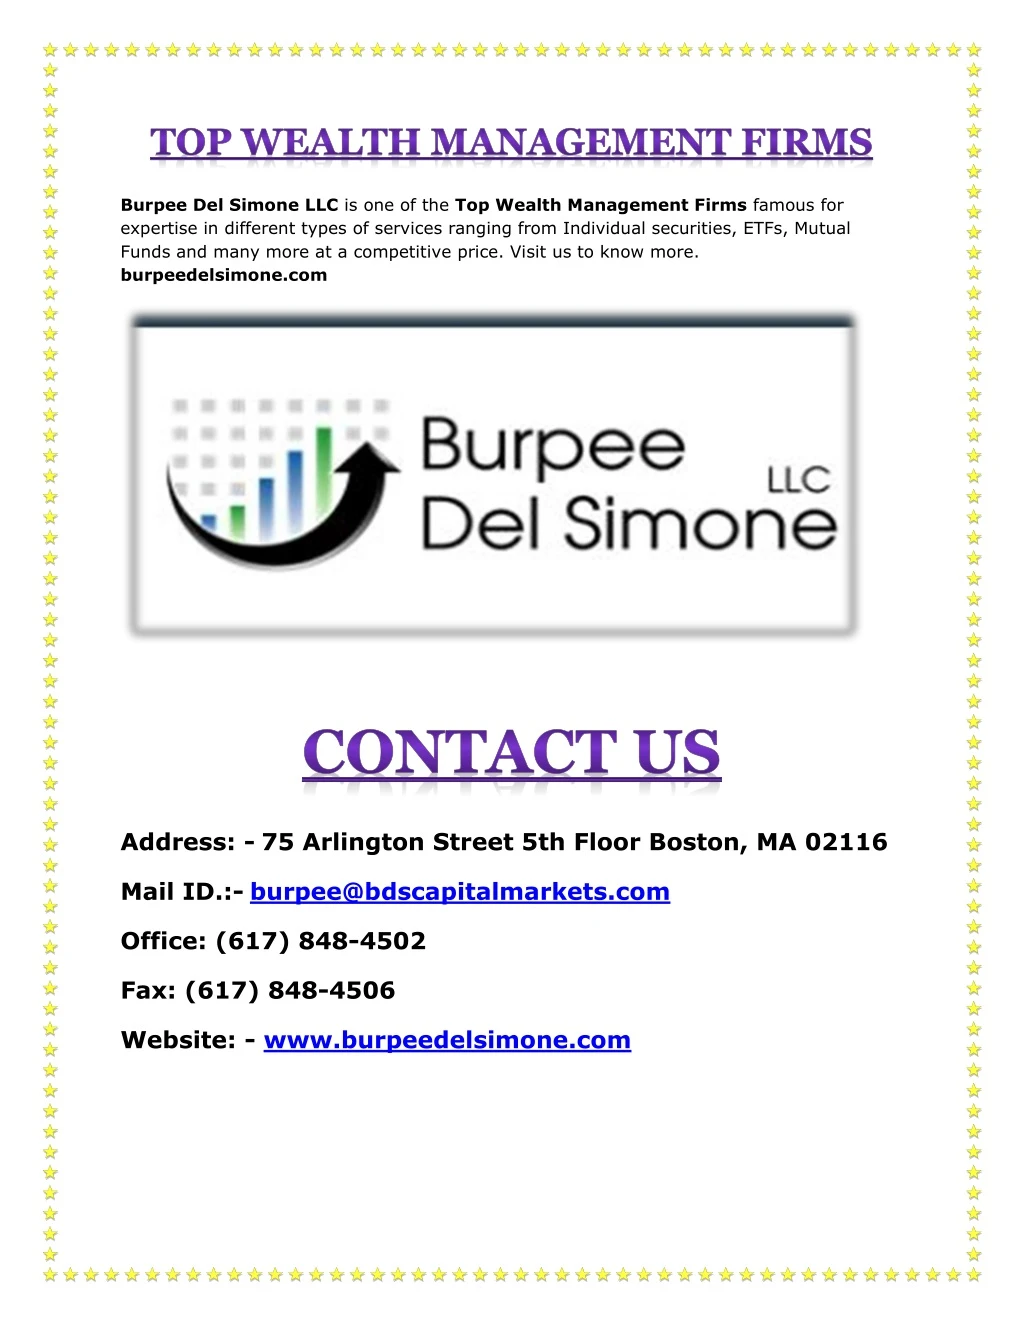 burpee del simone llc is one of the top wealth